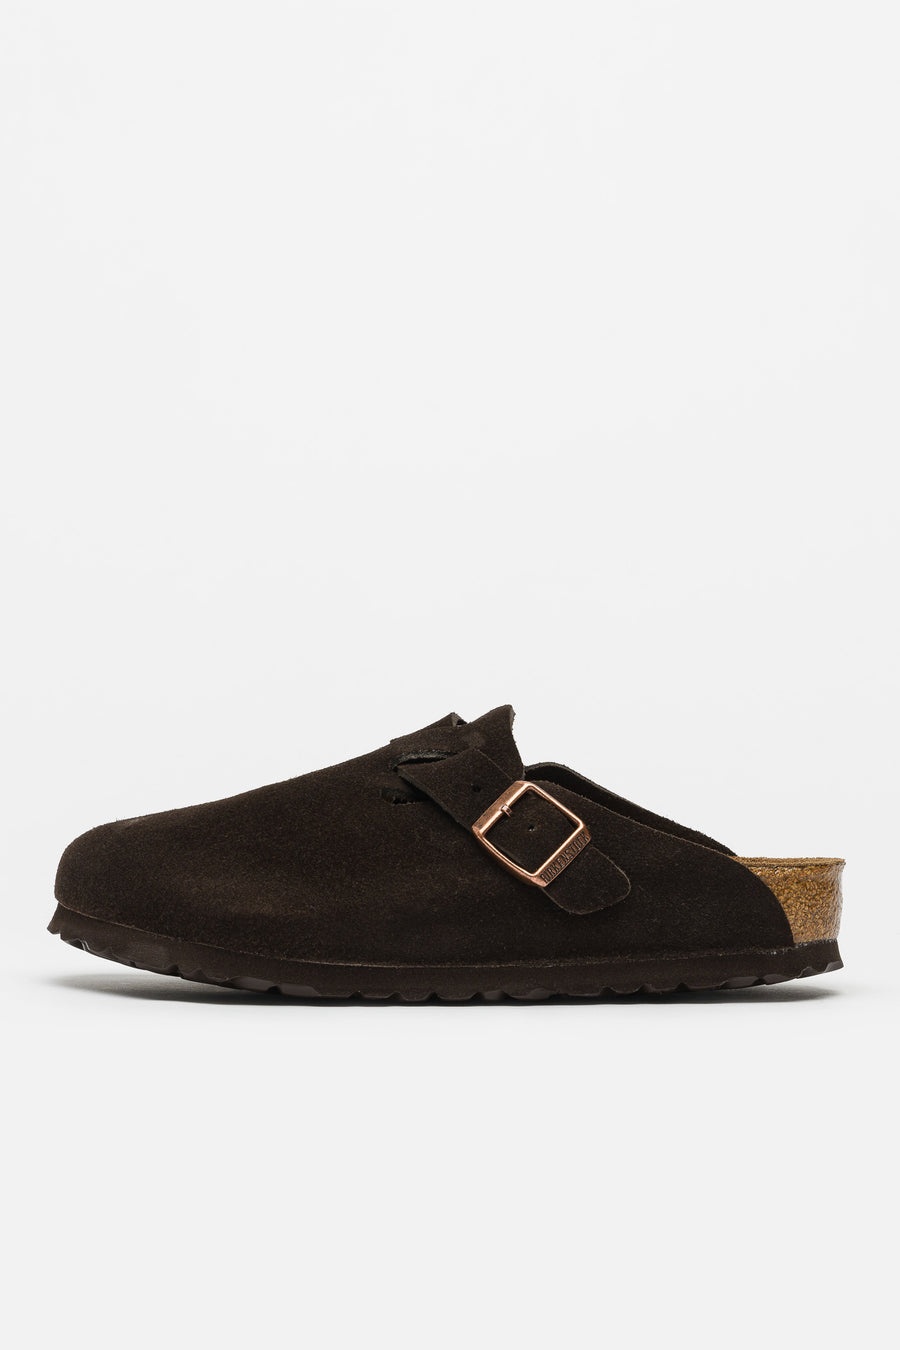 Boston Soft Footbed Suede/Leather Mule in Mocha - 1